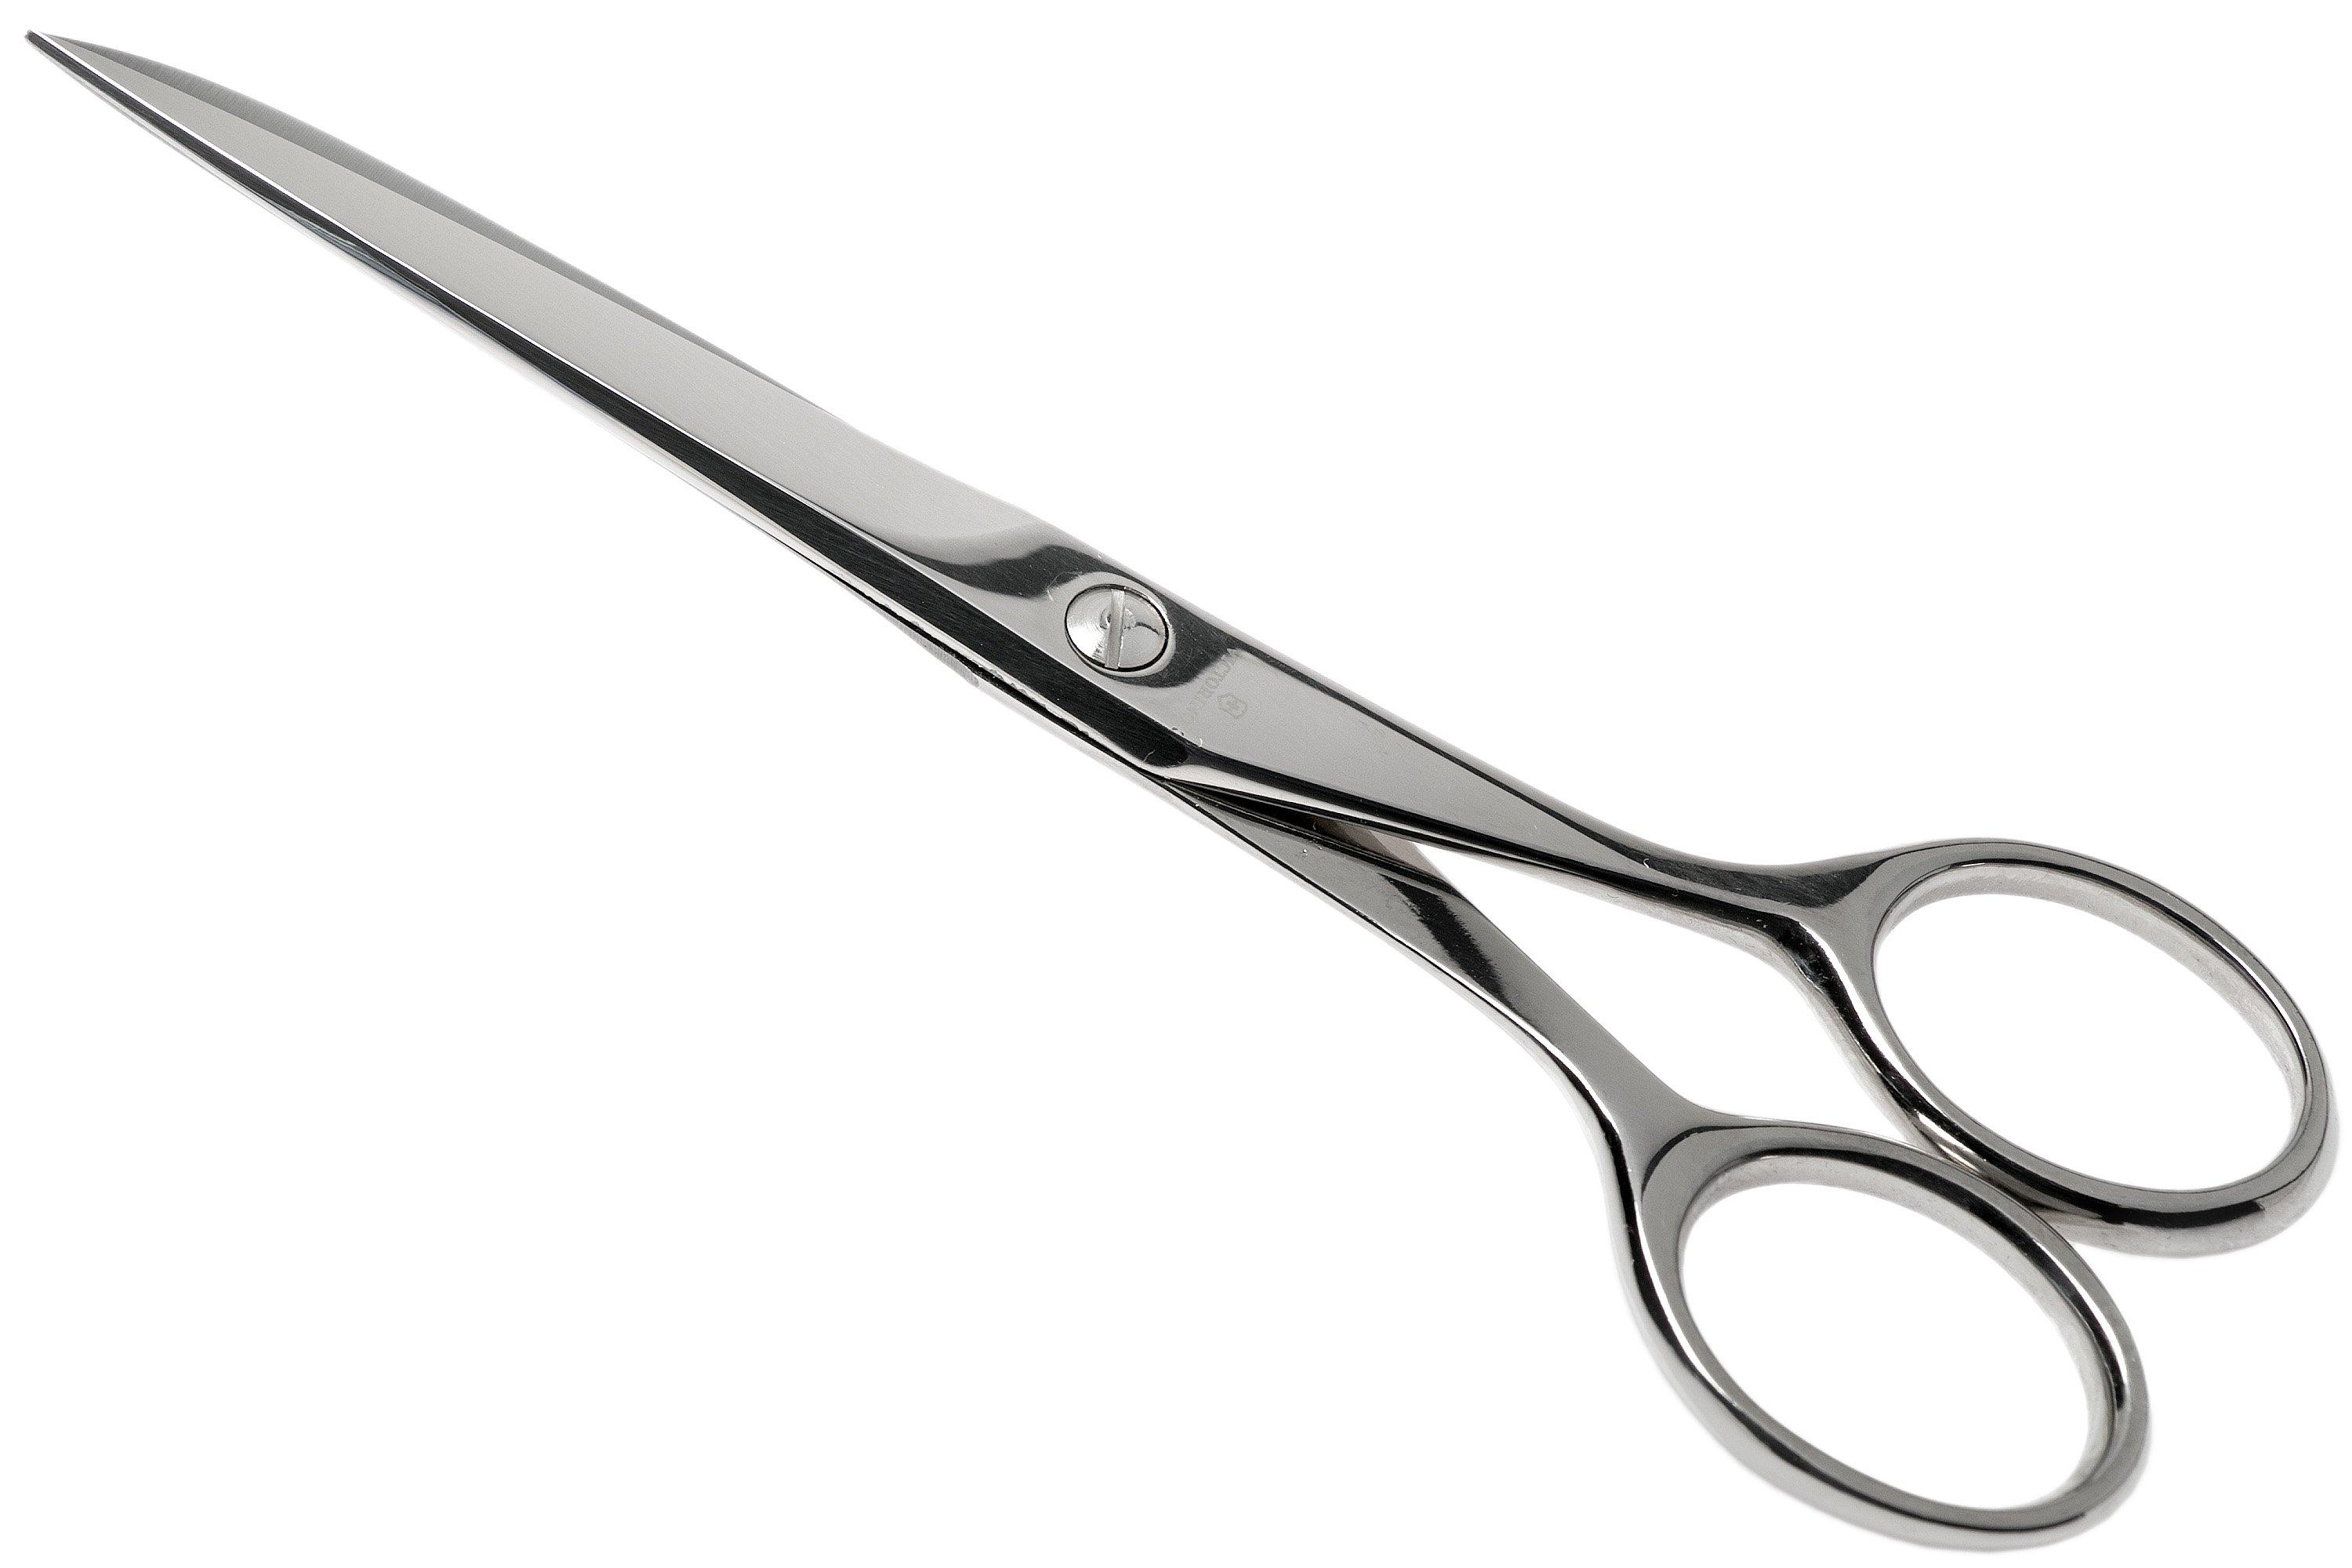 Victorinox Sweden | cm household at Advantageously shopping 15 8.1016.15, scissors